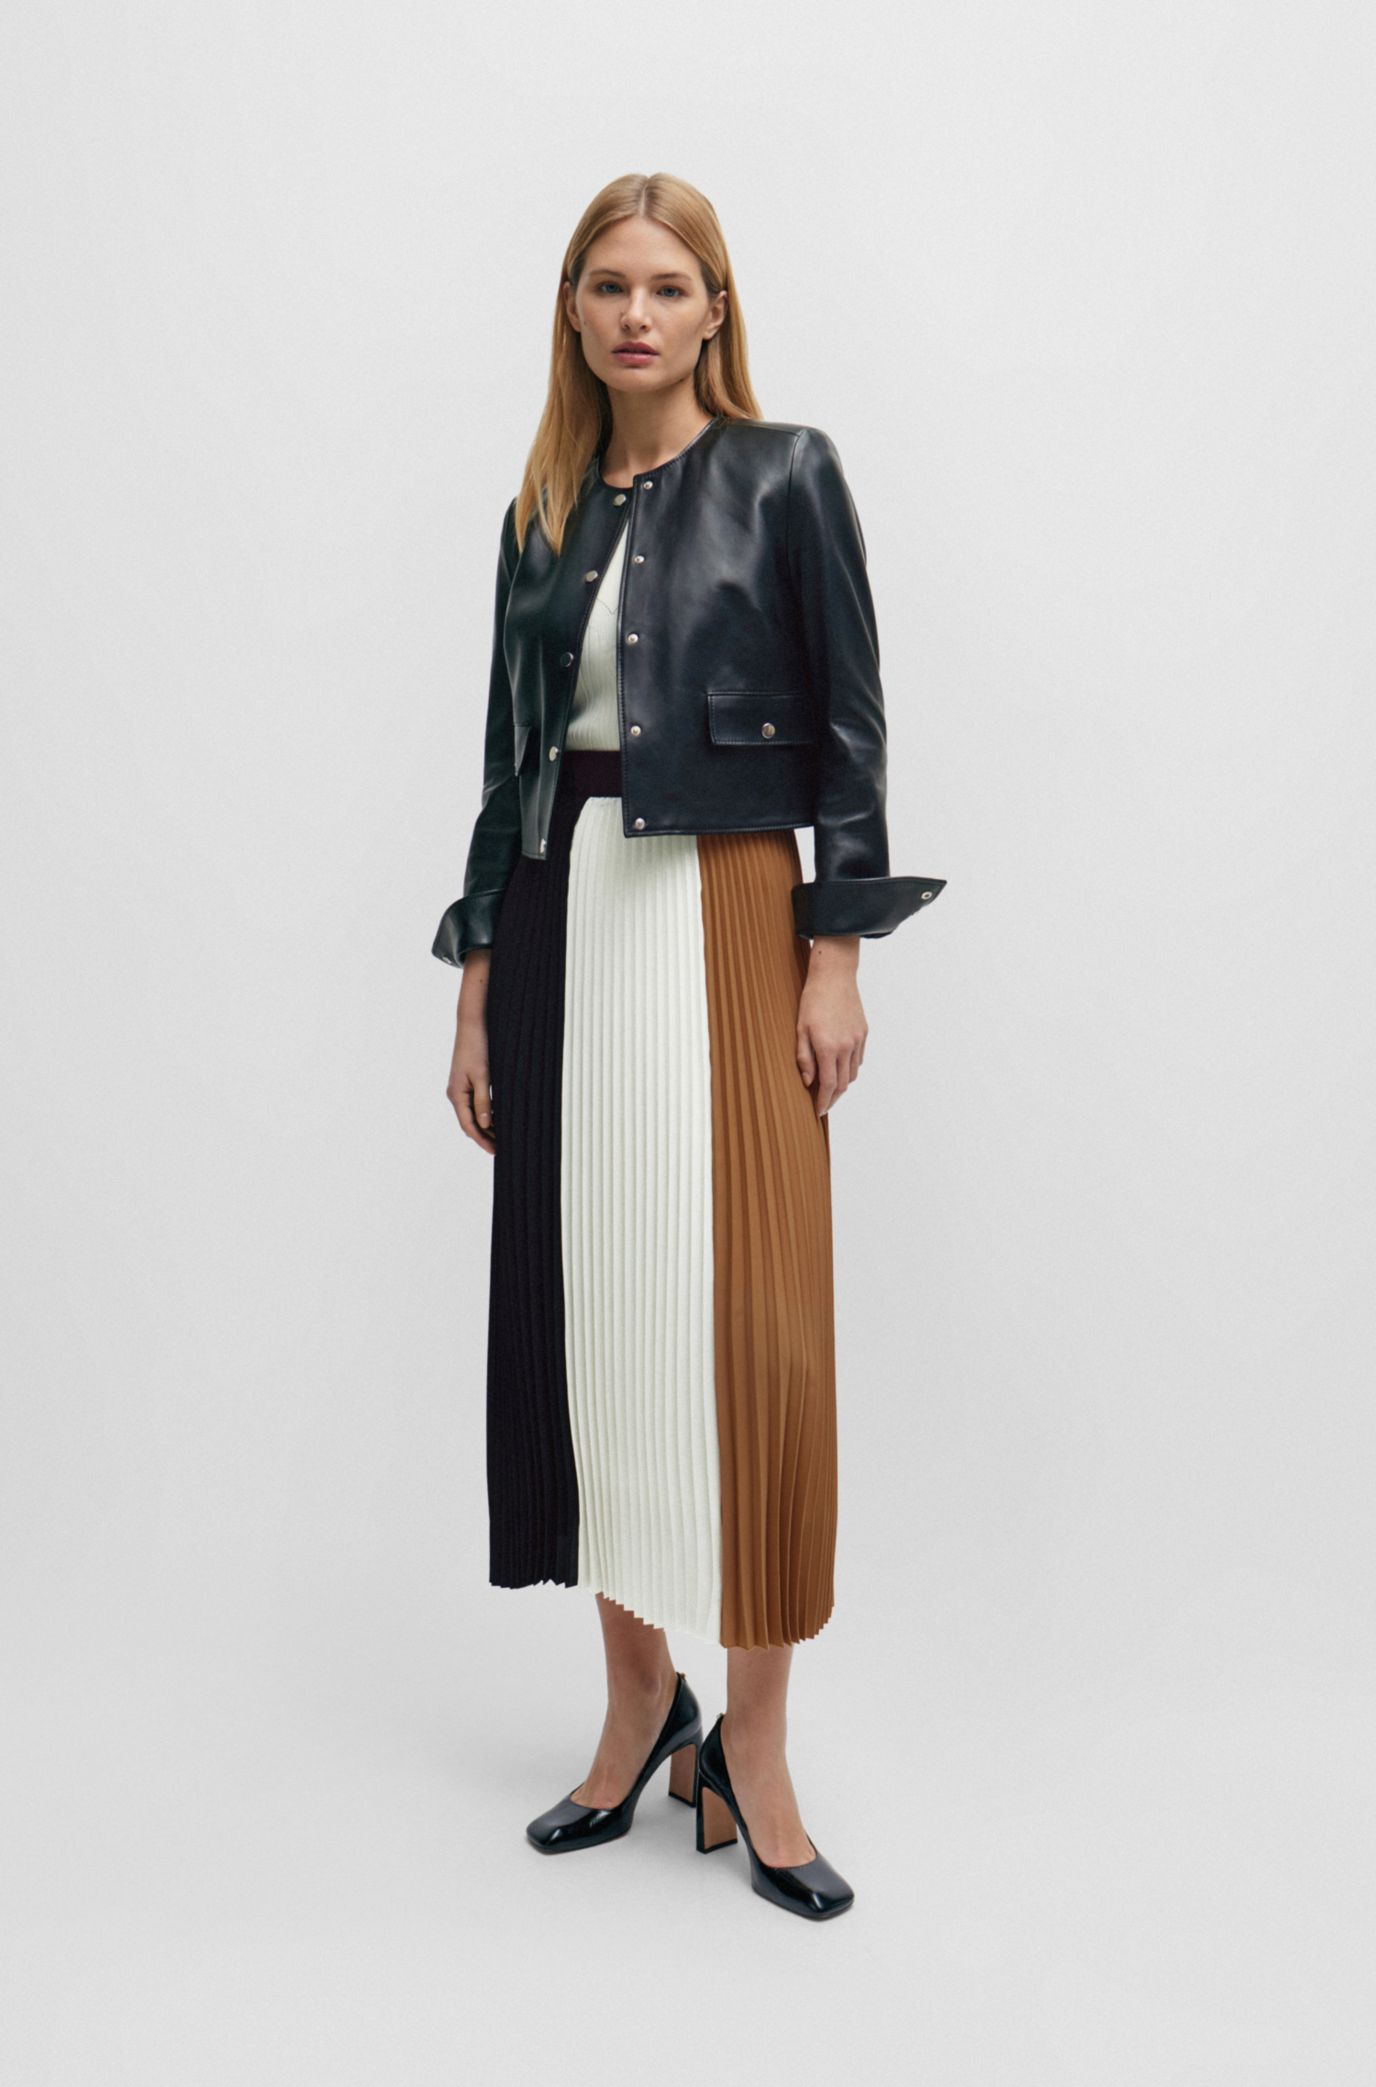 BOSS - Plissé skirt in signature colors with high-rise waist